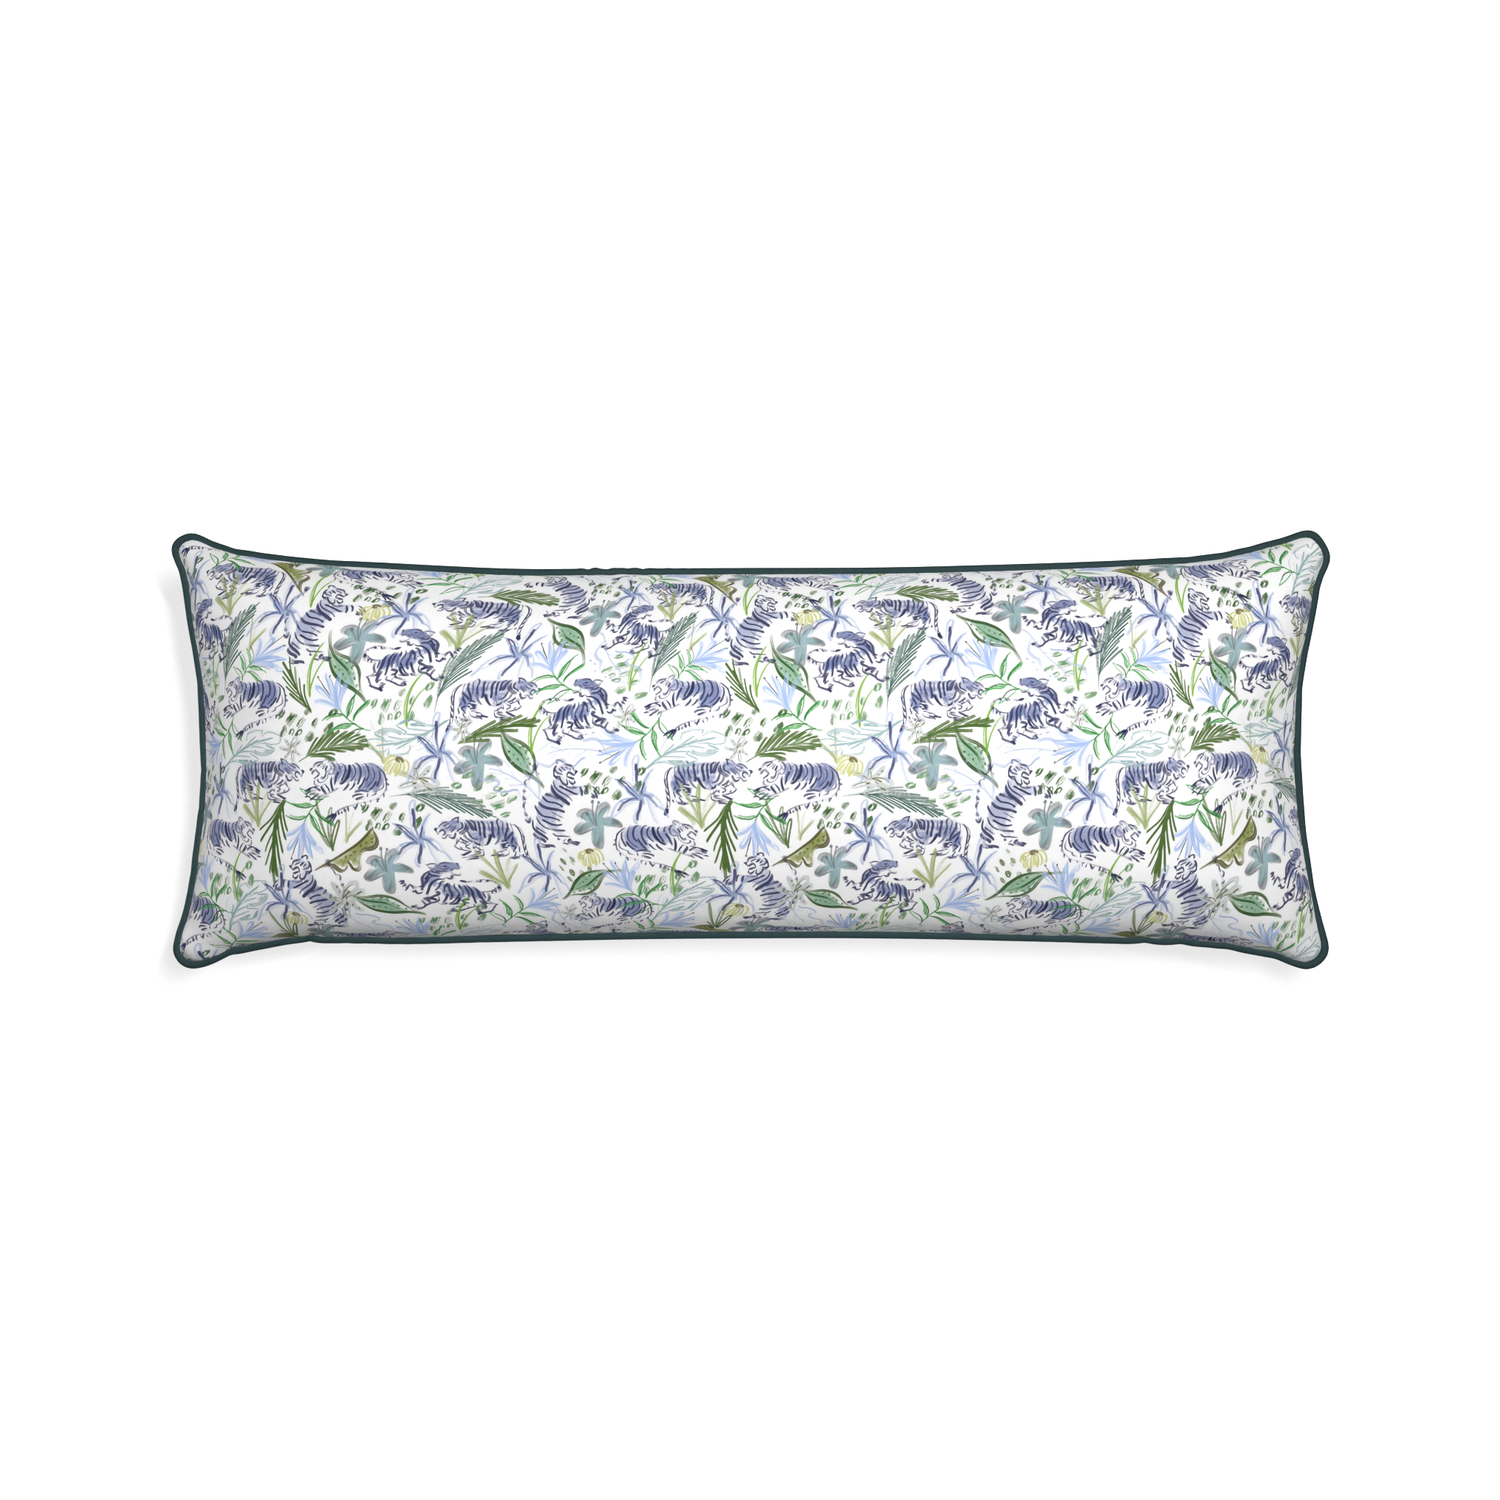 Xl-lumbar frida green custom green tigerpillow with p piping on white background